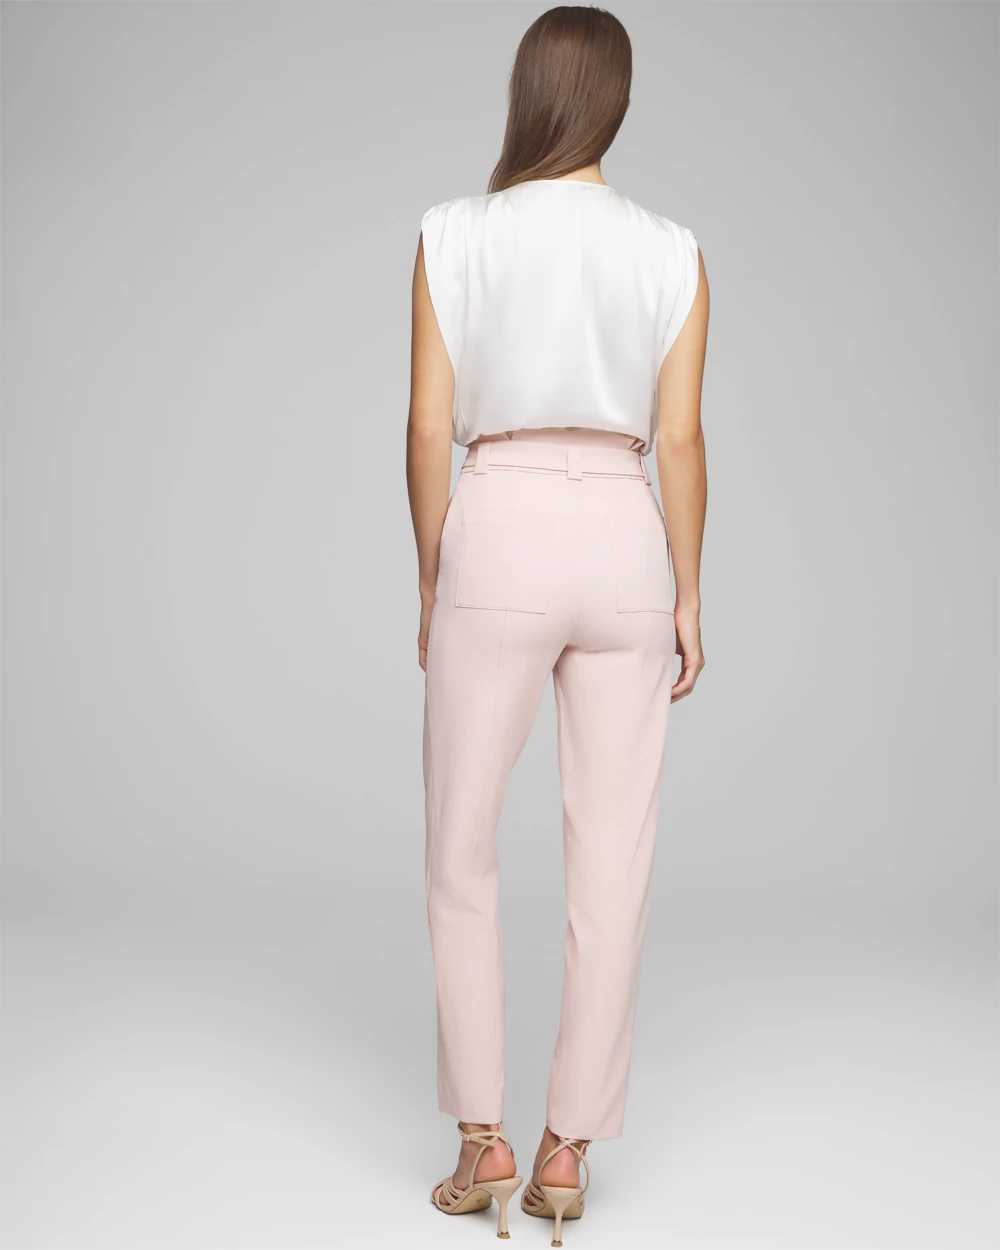 Petite Fluid Tapered Ankle Pants click to view larger image.